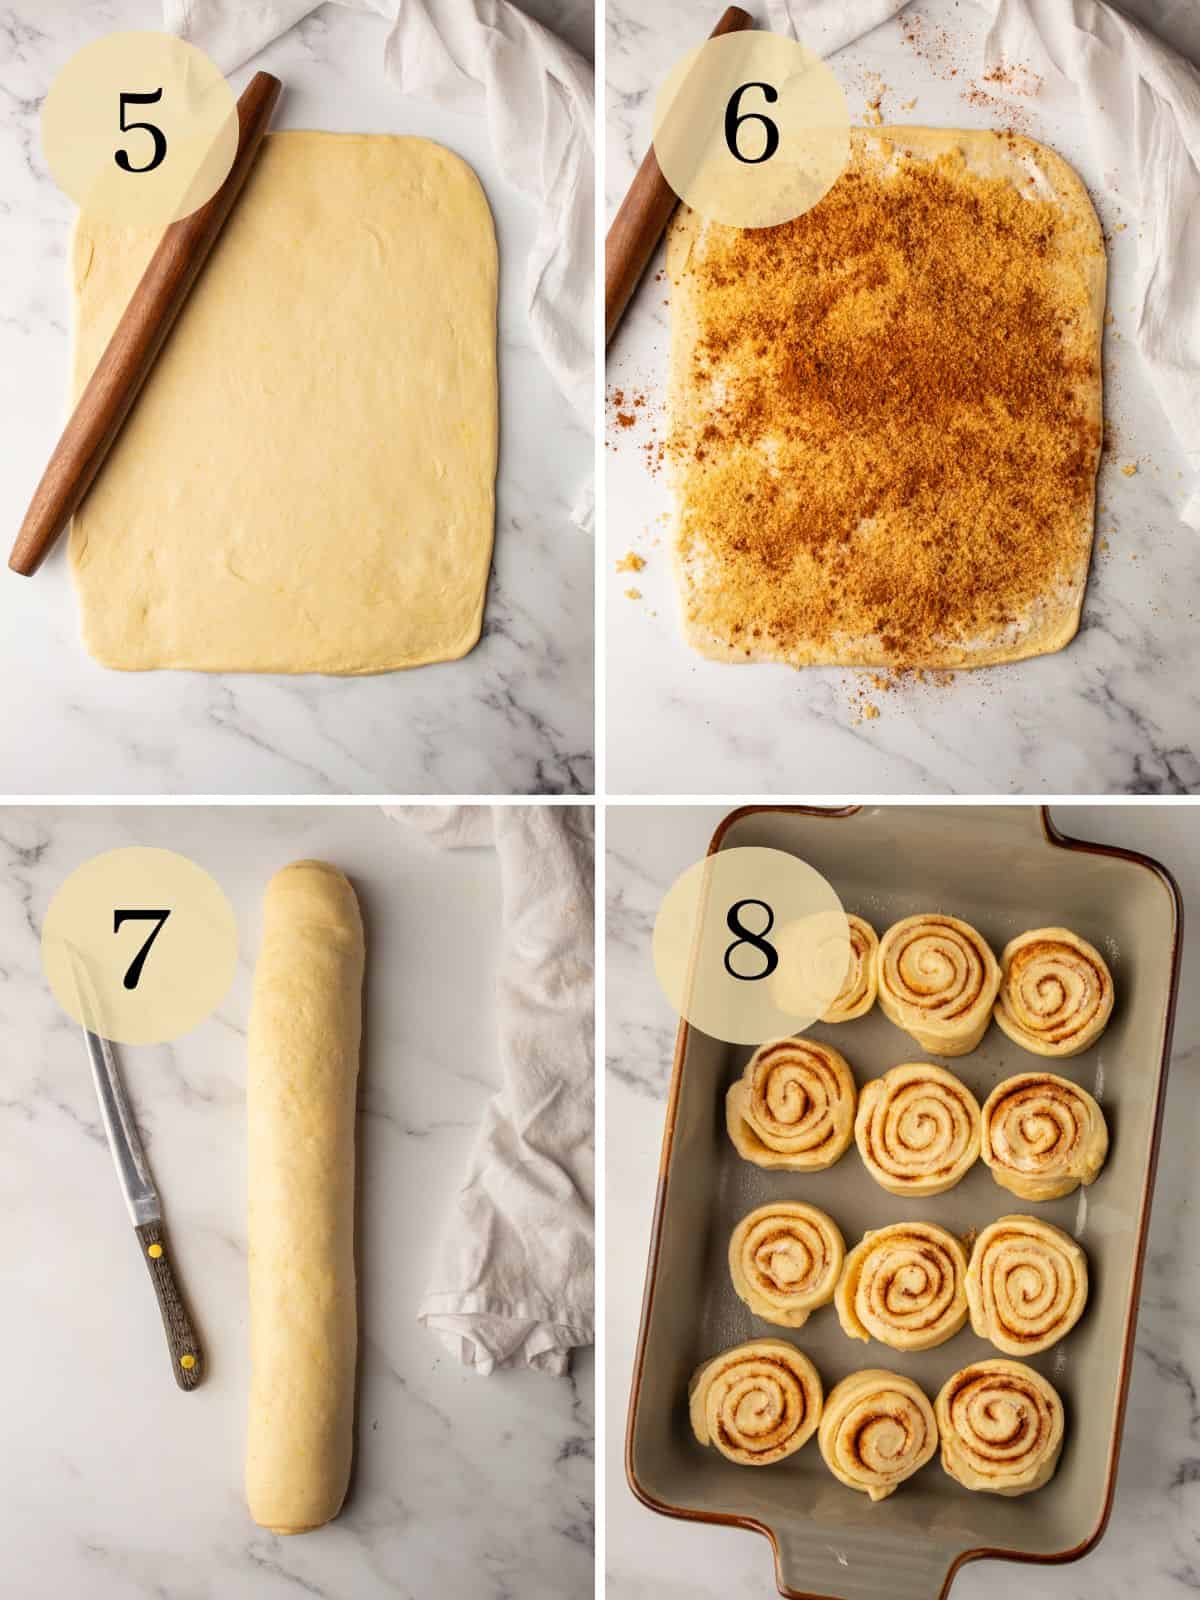 dough rolled out, topped with cinnamon, sugar and butter, rolled dough and cut rolls in pan.